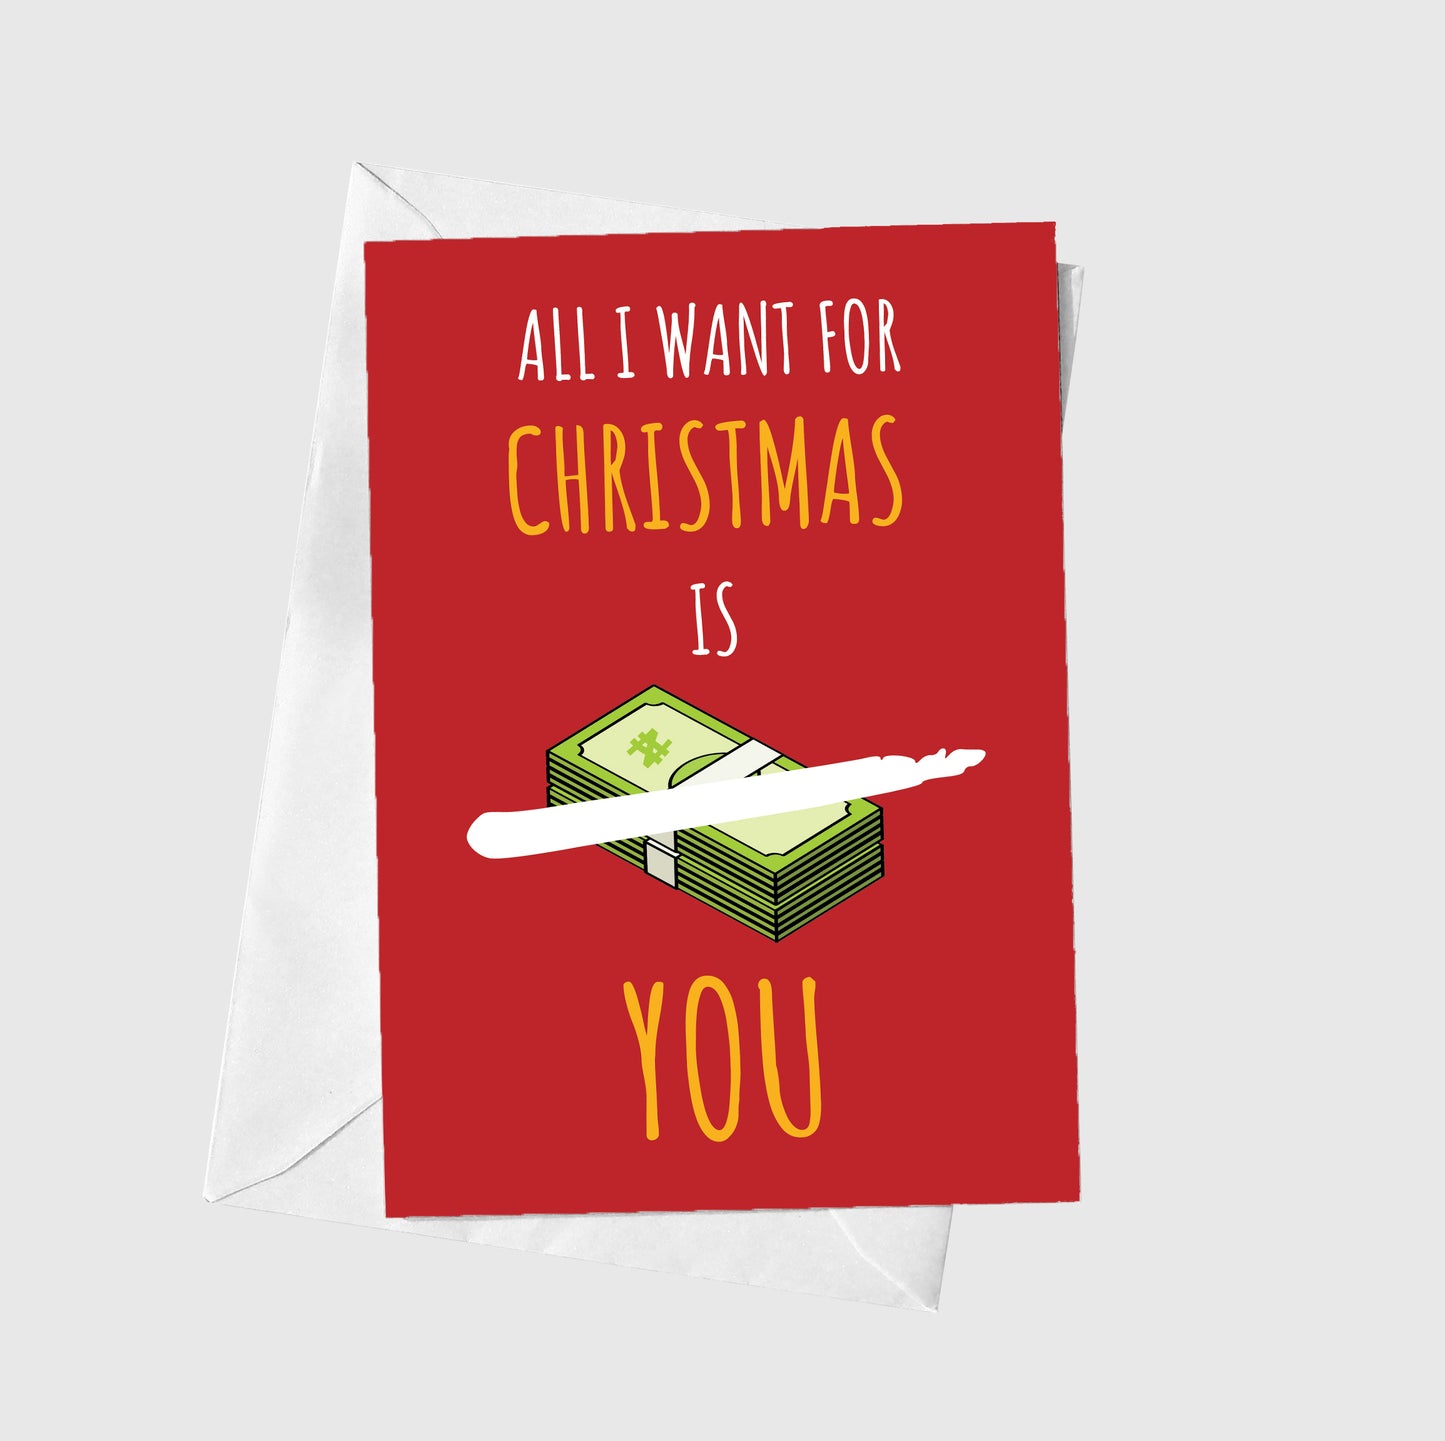 All I Want For Christmas Is You (Not Money)